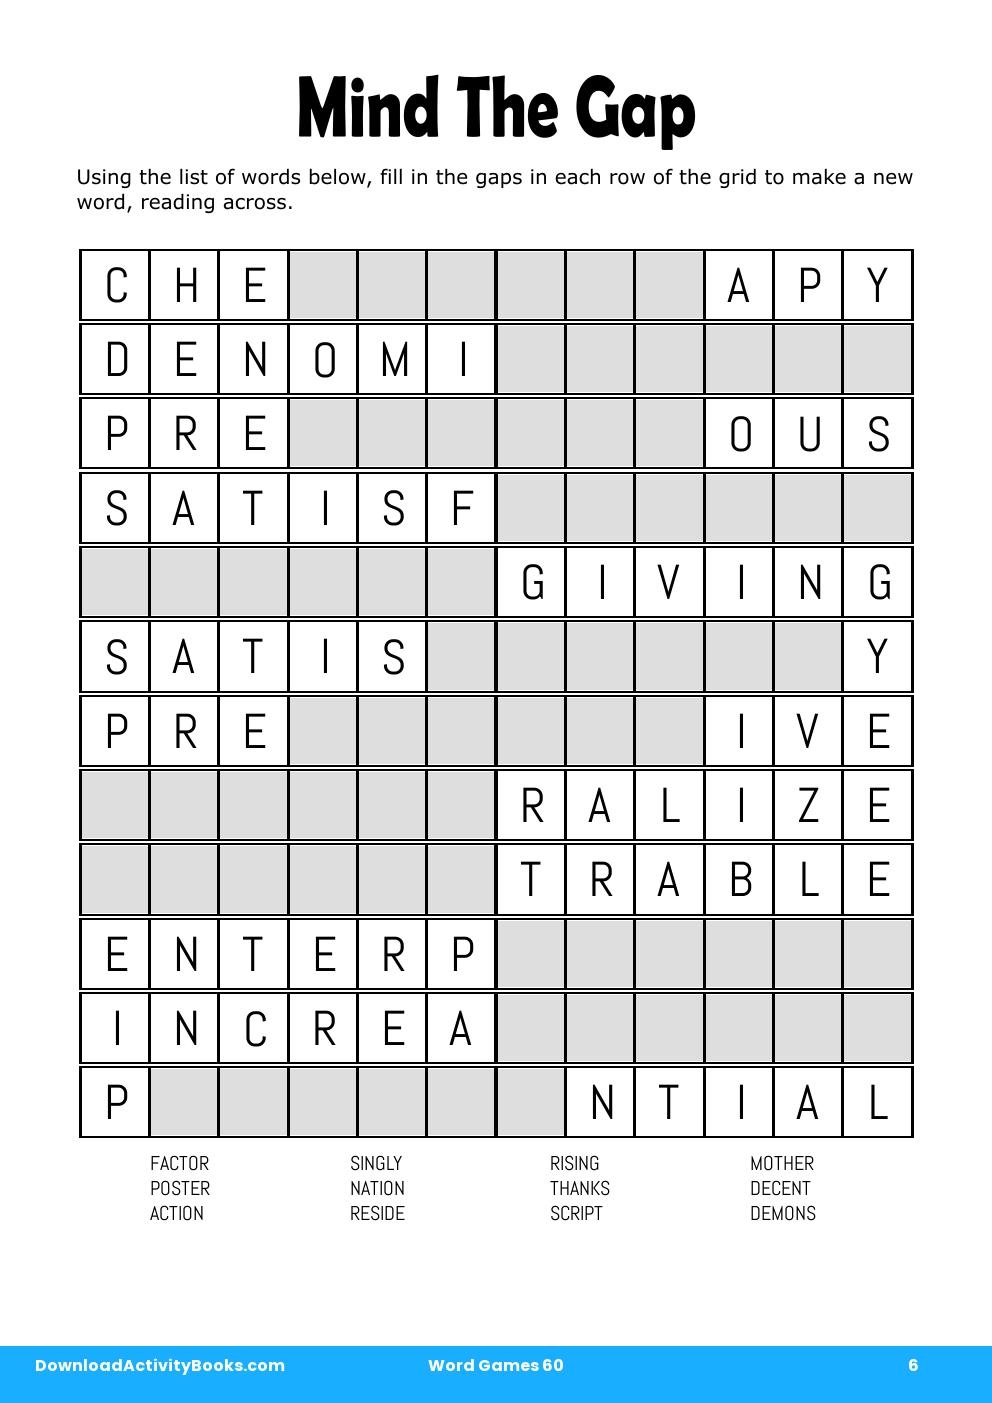 Mind The Gap in Word Games 60